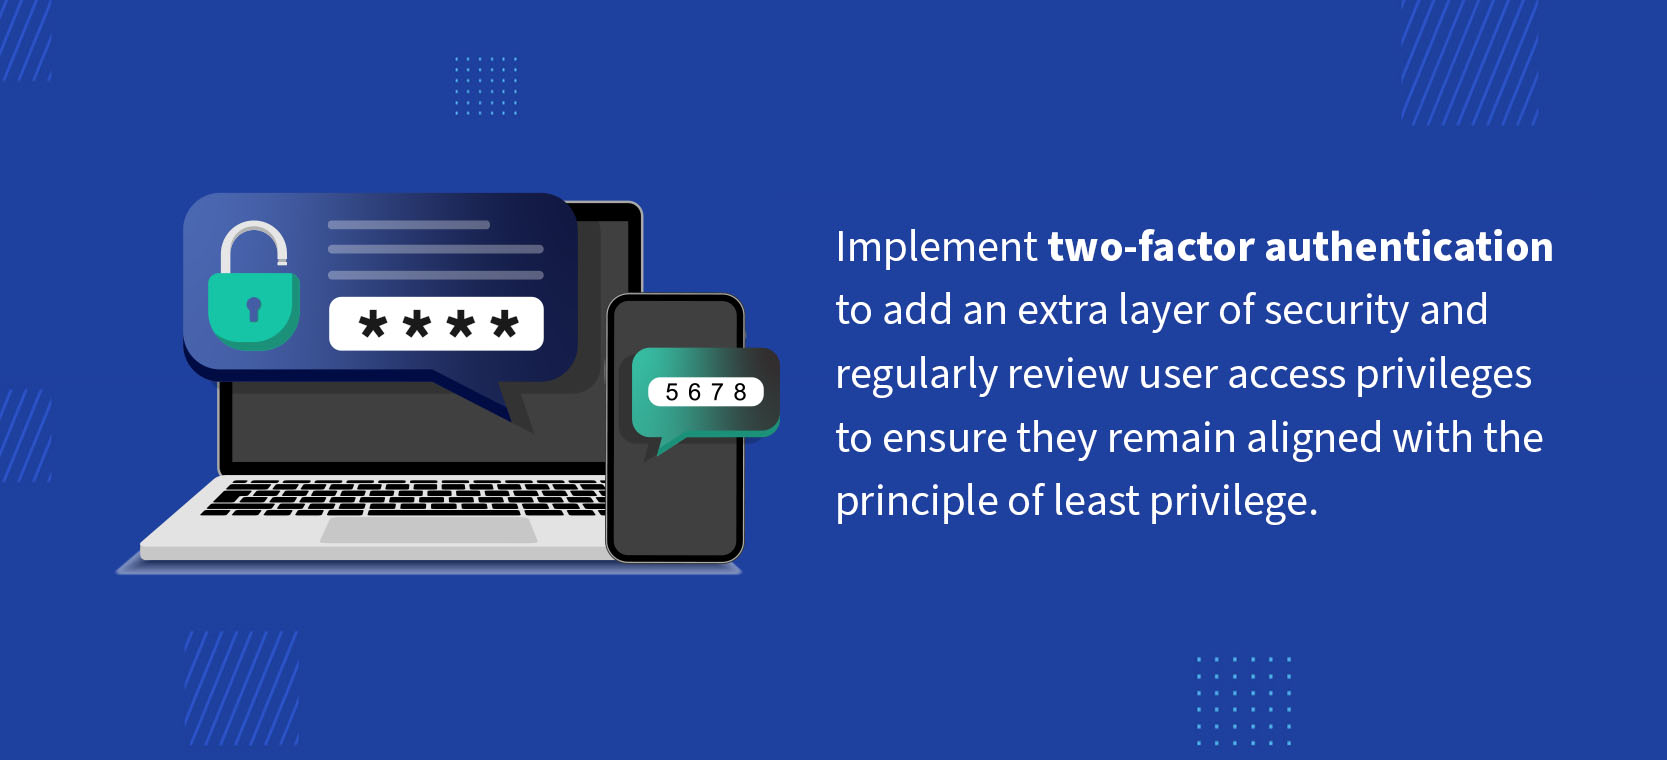 Implement two-factor authentication to add an extra layer of security and regularly review user access privileges to ensure they remain aligned with the principle of least privilege.